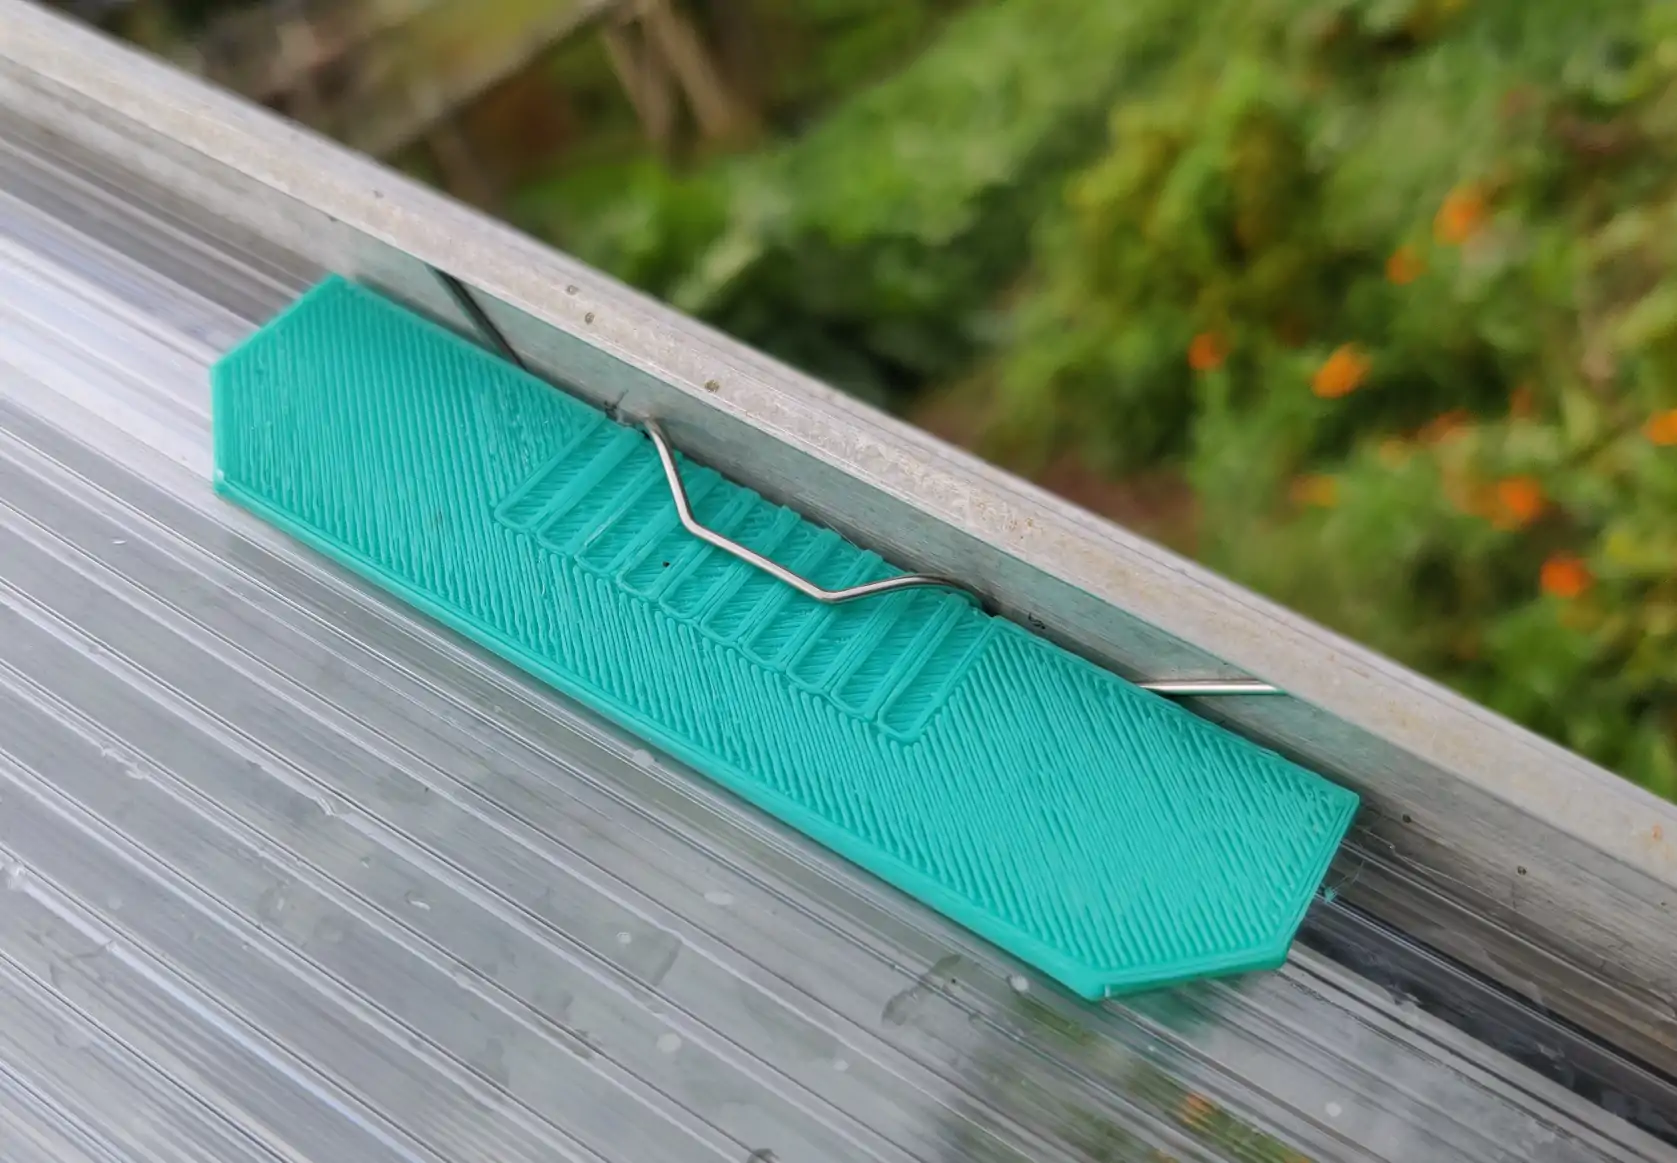 A green plastic rectangle sitting between the contact-point of the metal w-clip and plastic pane